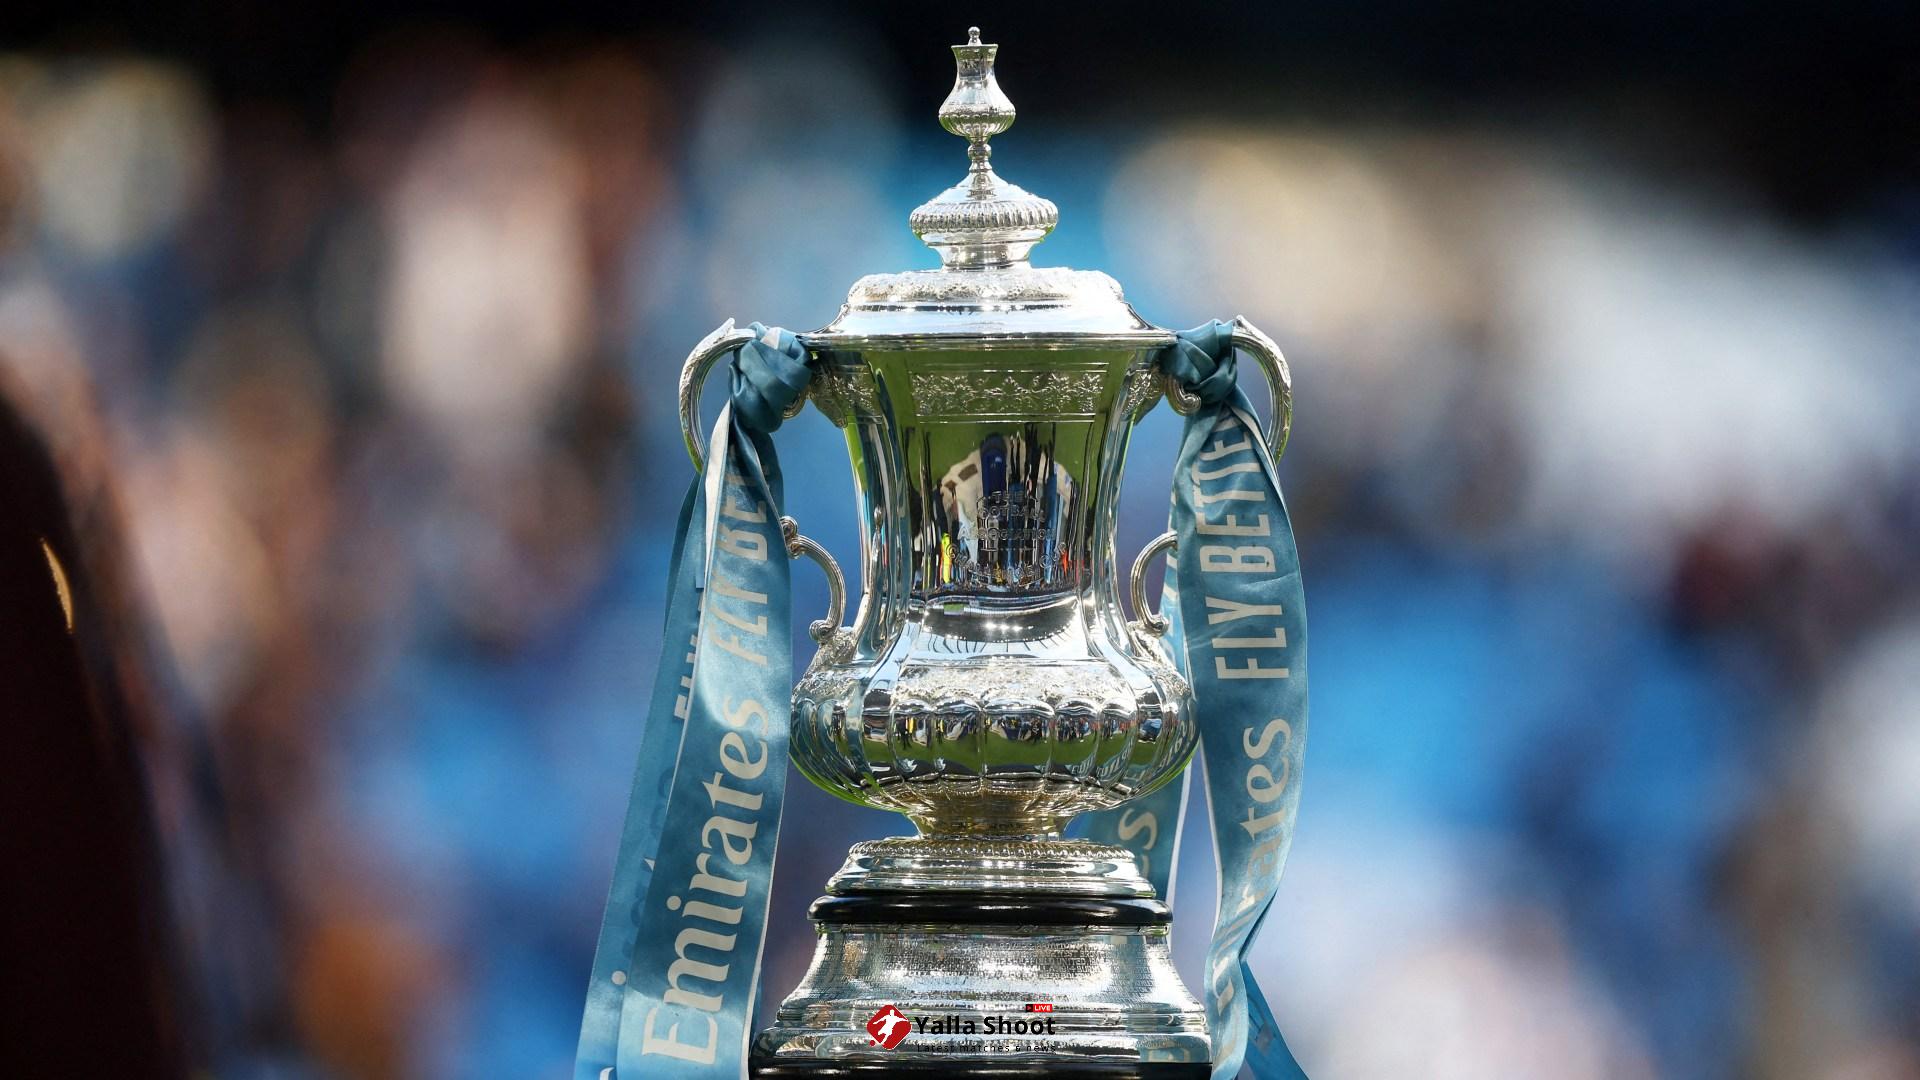 FA Cup third round replays LIVE: Eastleigh host Newport with a chance to face Man Utd, Wolves play Brentford - latest